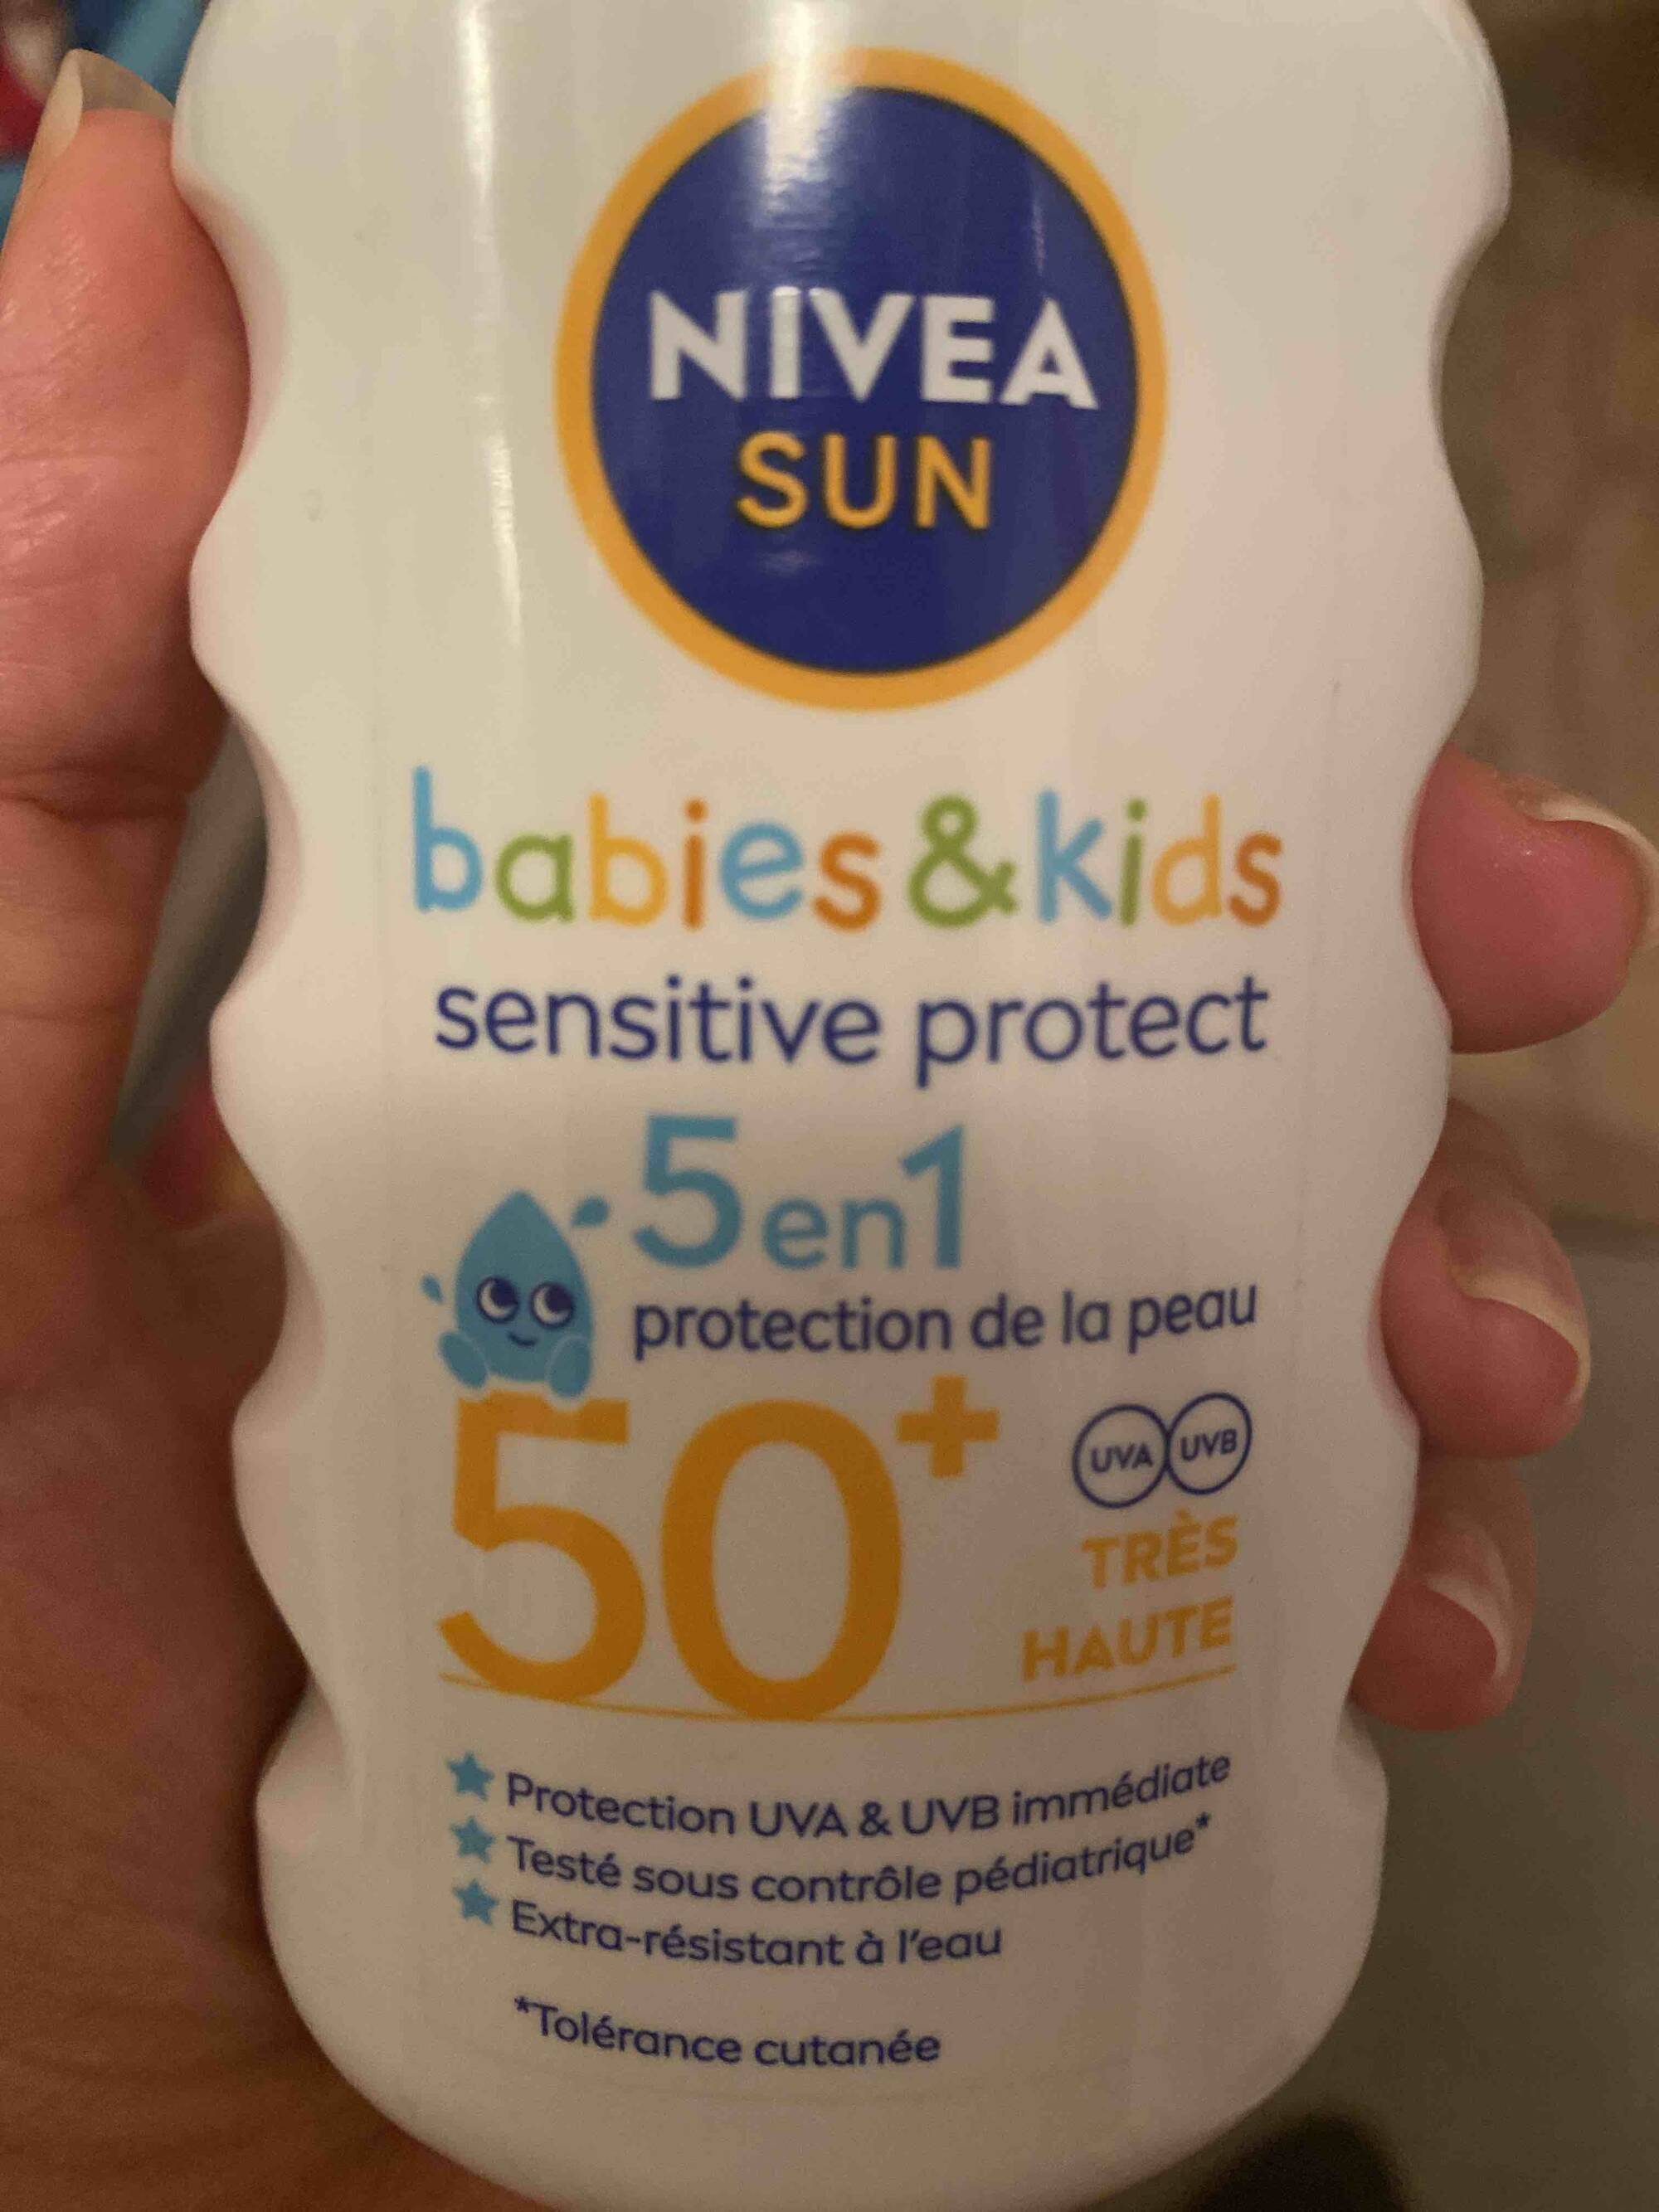 Weleda - Edelweiss baby & kids - crème solaire SPF 50 - peaux